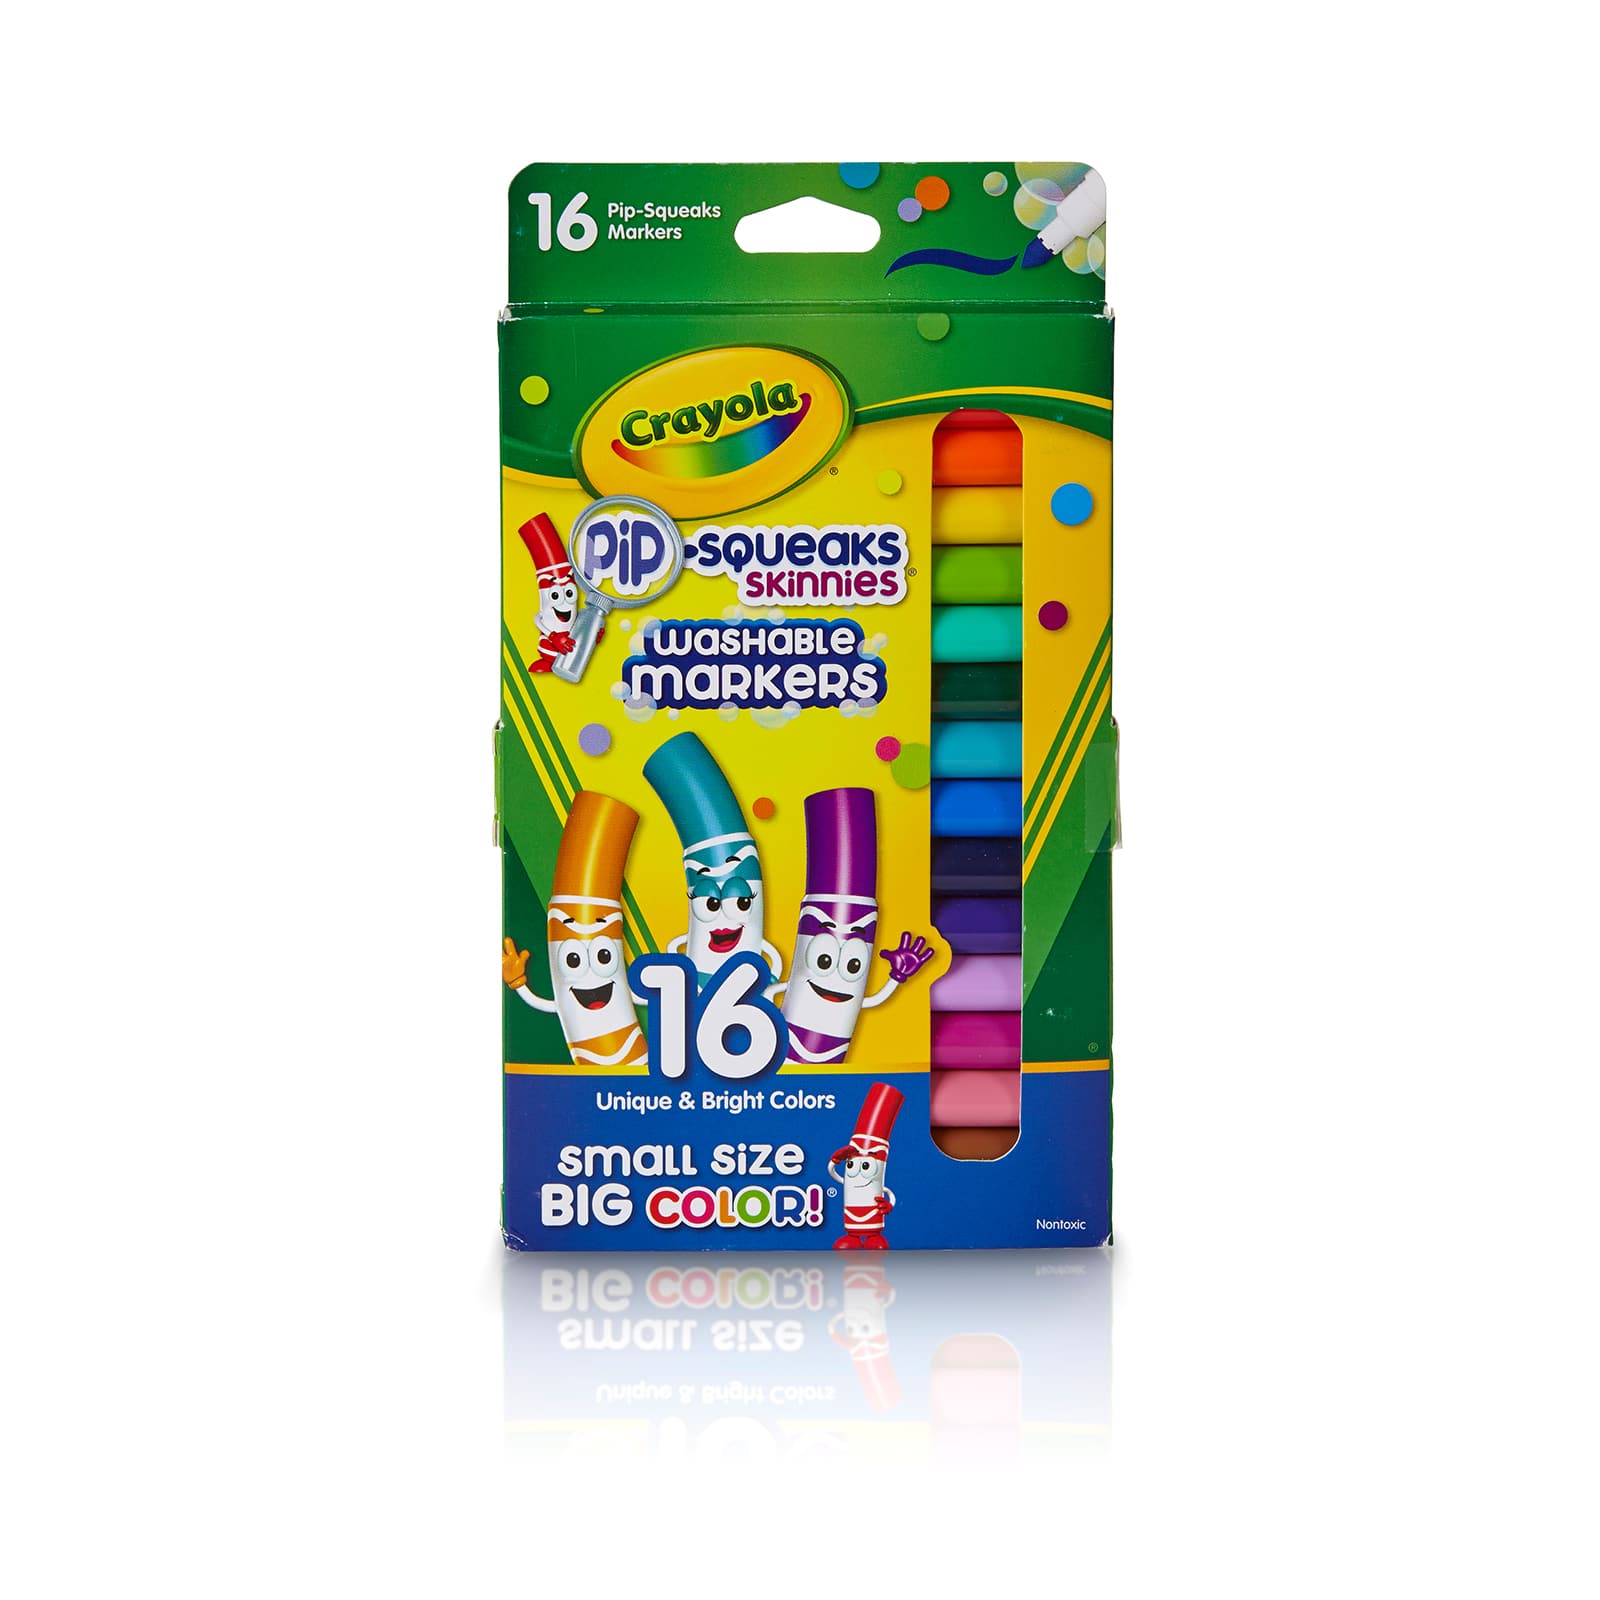 Crayola Pip-squeaks Washable Markers 16 Count 